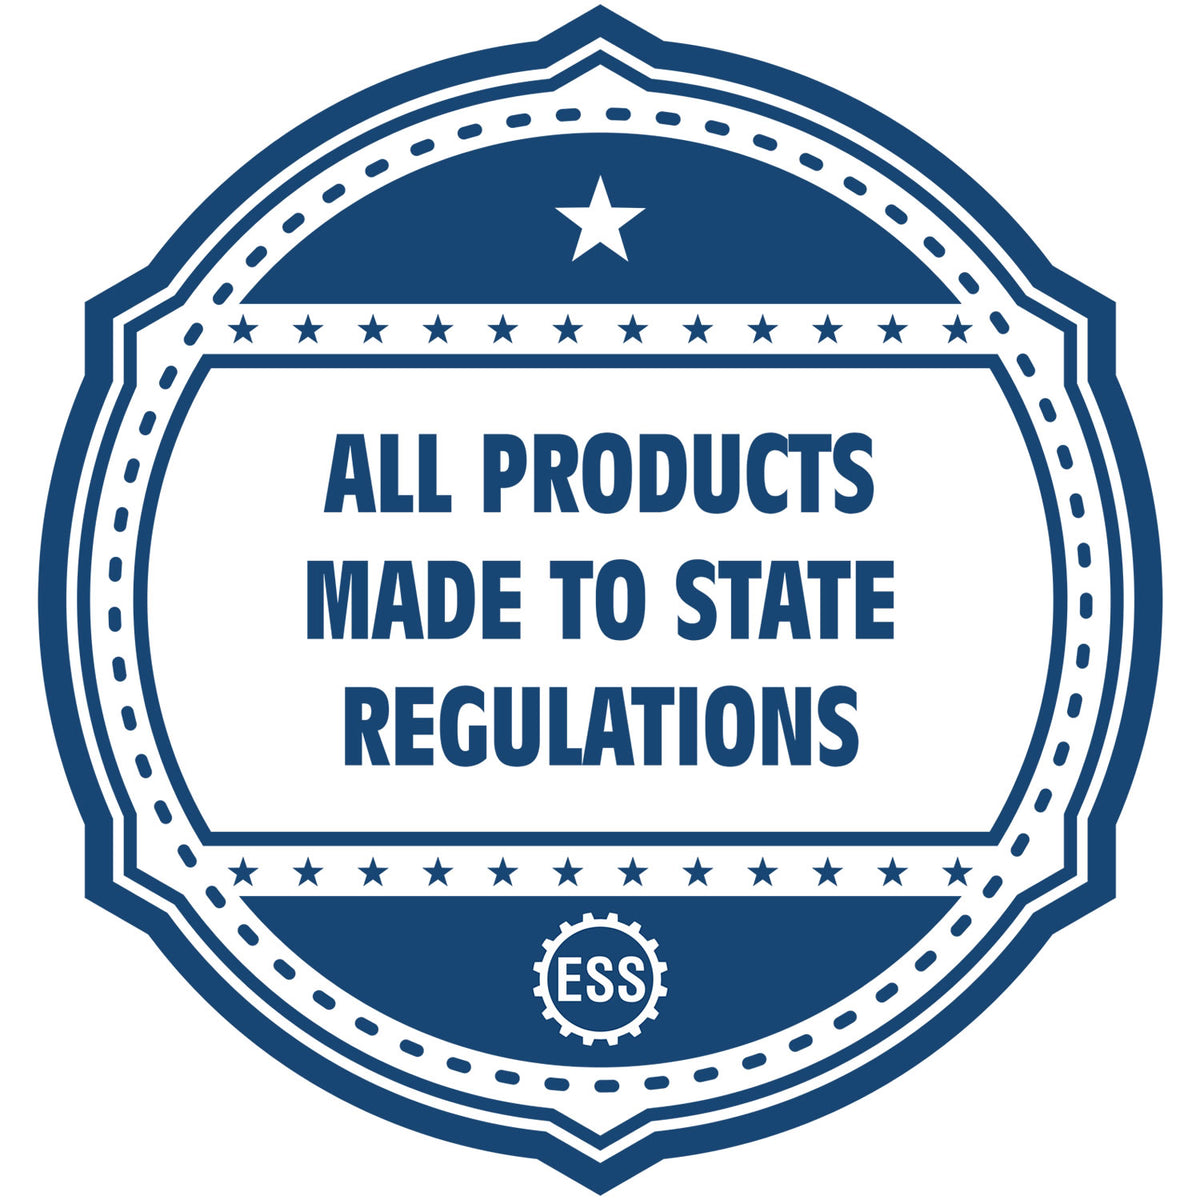 An icon or badge element for the Self-Inking Alabama PE Stamp showing that this product is made in compliance with state regulations.